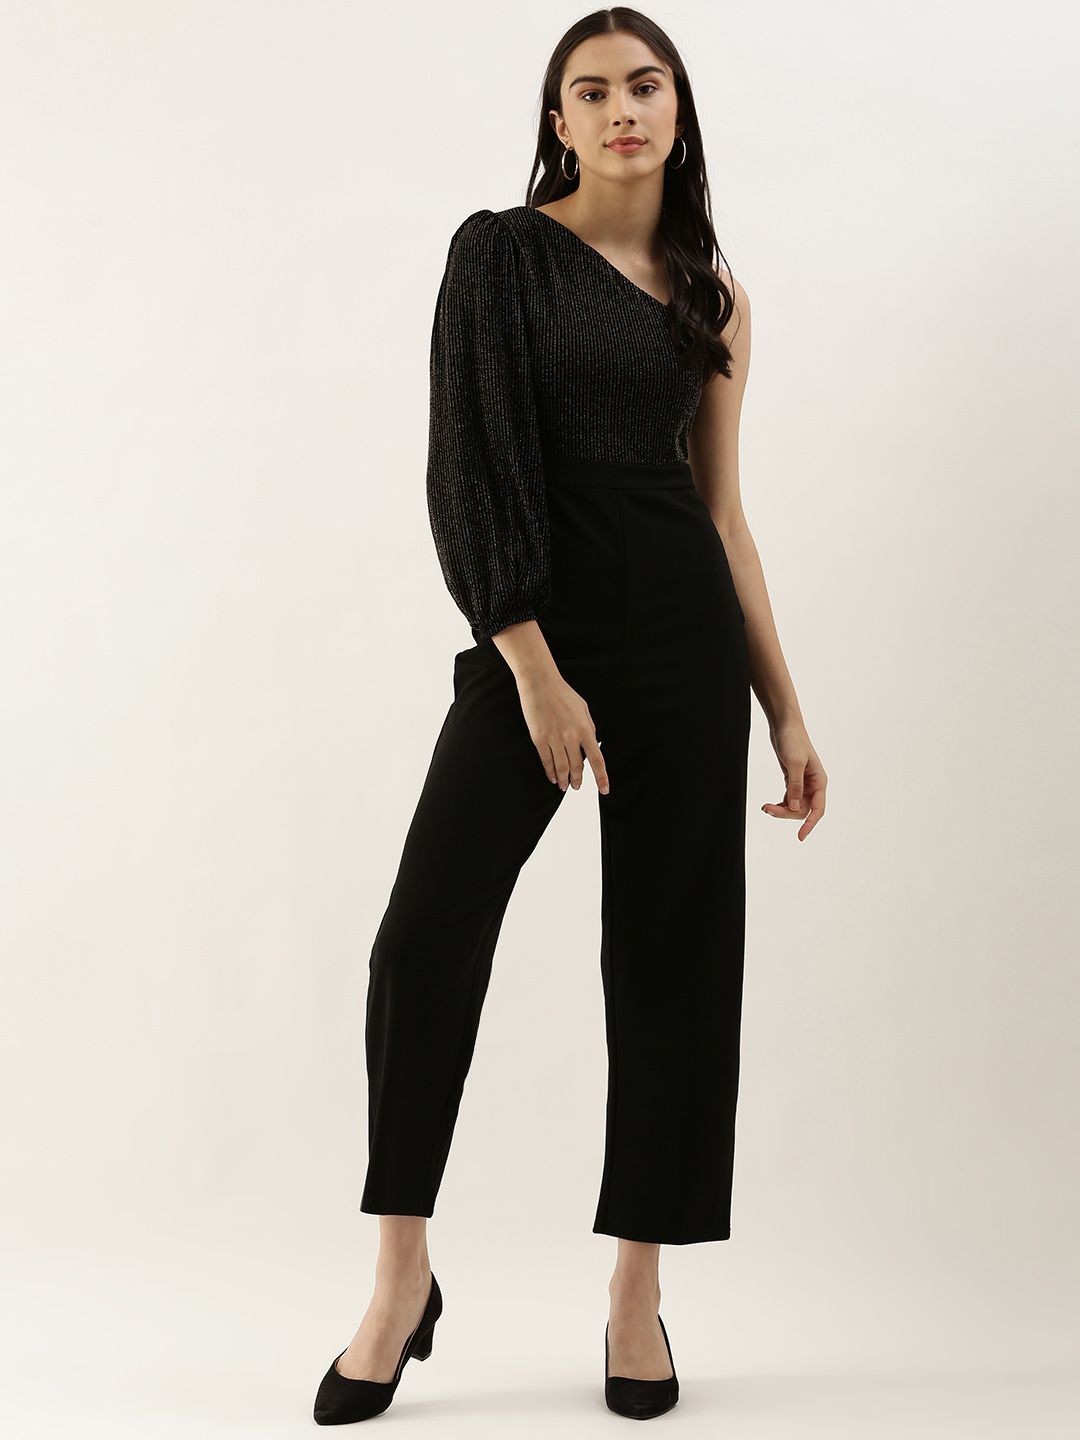 AND Black & Gold-Toned Halter Neck Striped Basic Jumpsuit Price in India